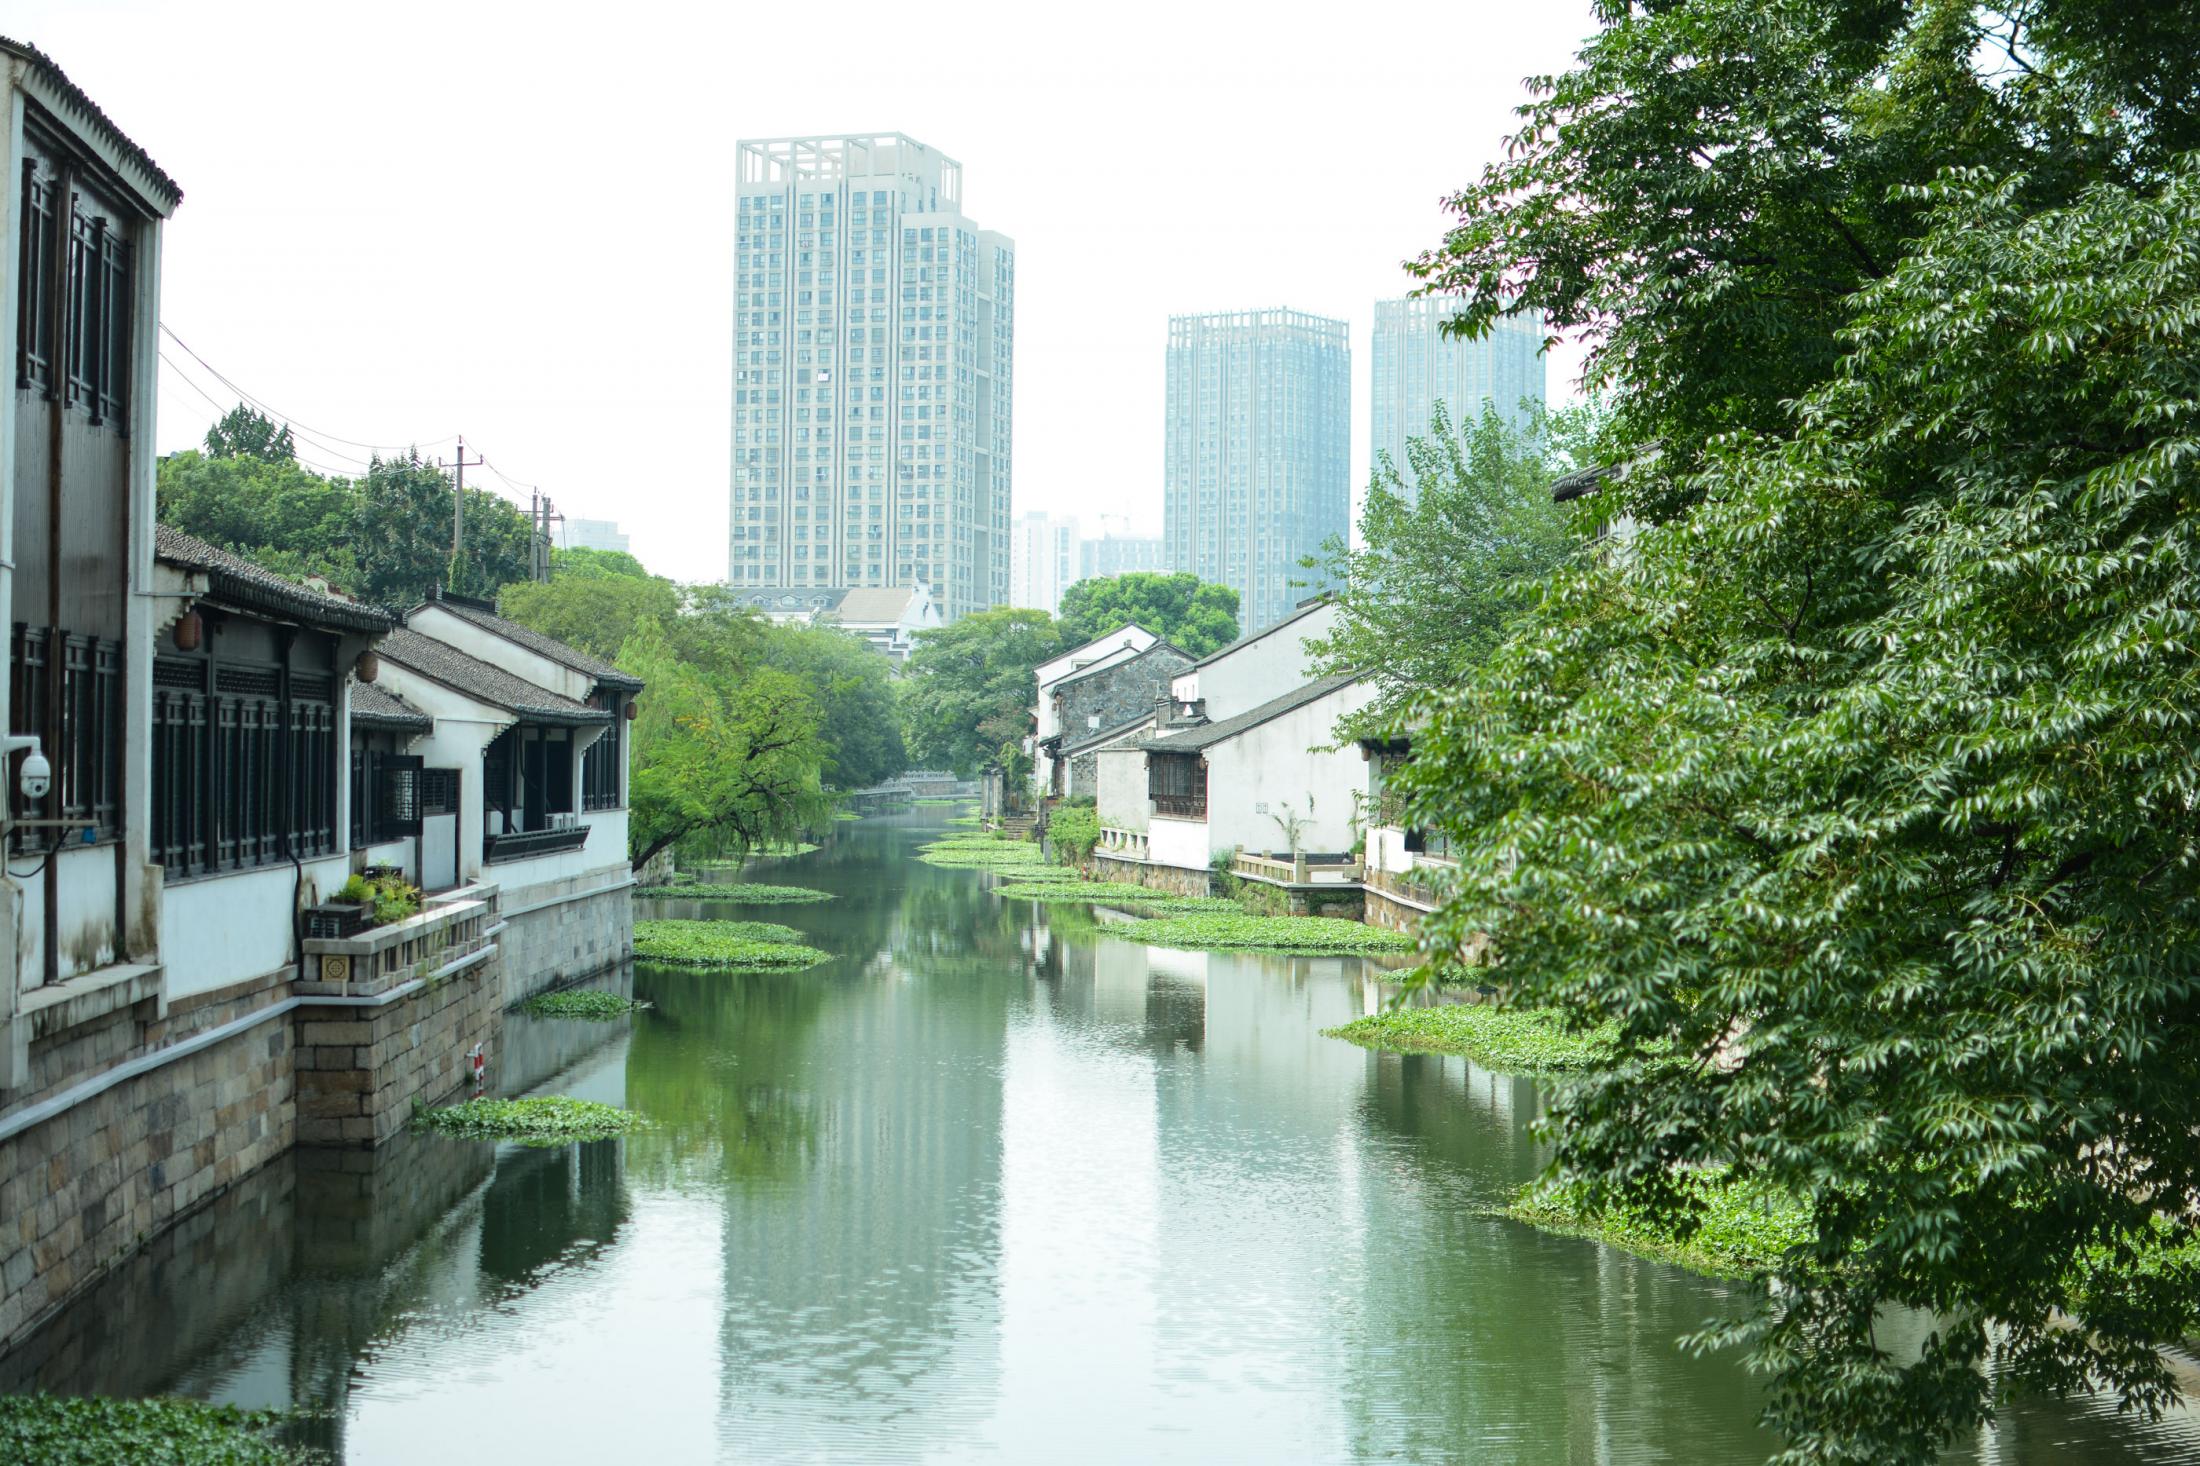 Qing Guo Alley's Big Bet - Qing Guo Alley is in the heart of Changzhou, home to some...